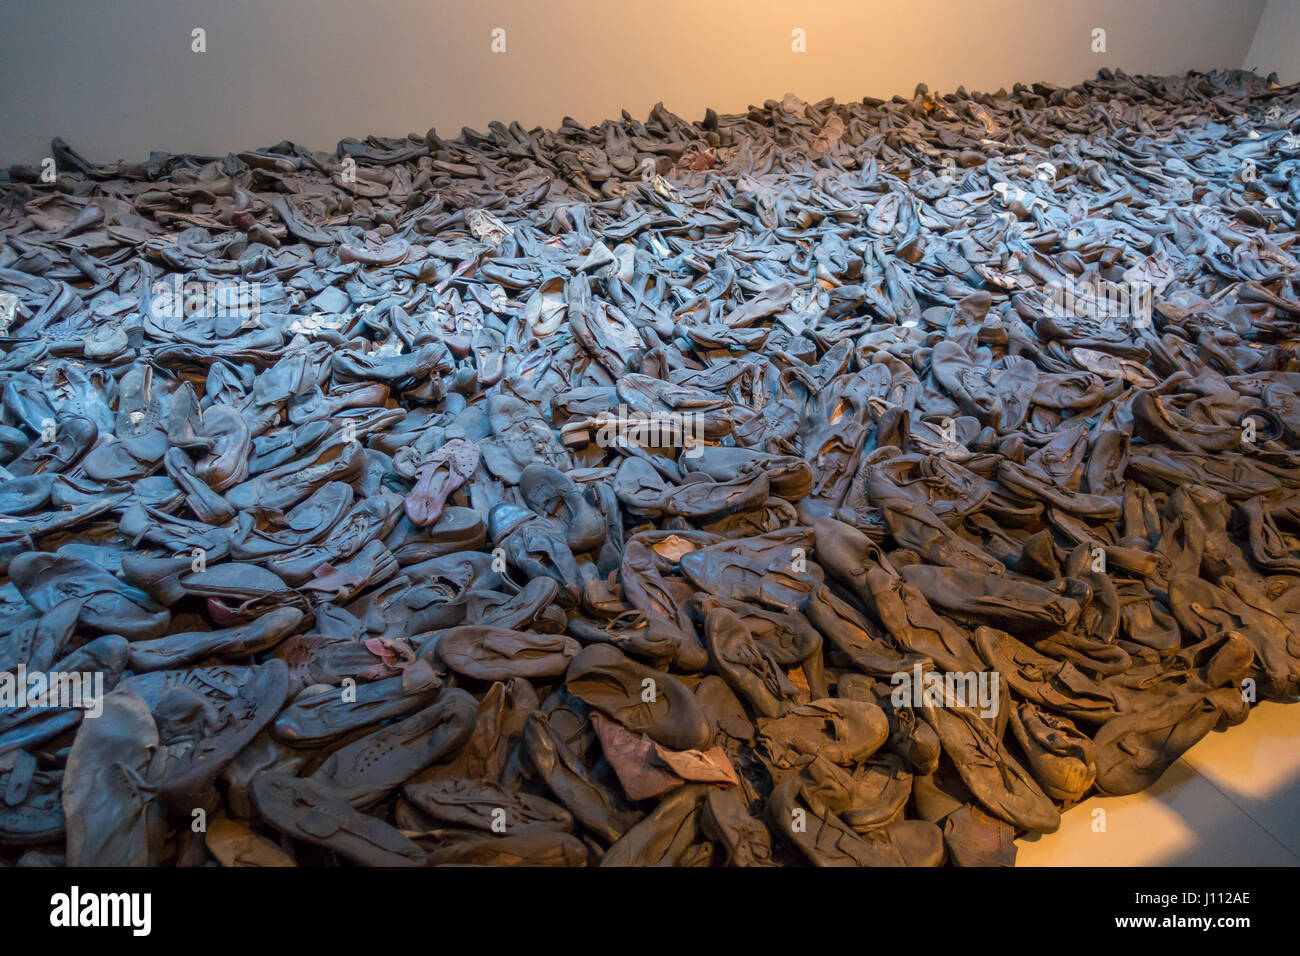 WASHINGTON, DC, USA - United States Holocaust Memorial Museum. Exhibit of shoes found at Majdanek camp in Lublin, Poland at liberation July 1944. Stock Photo